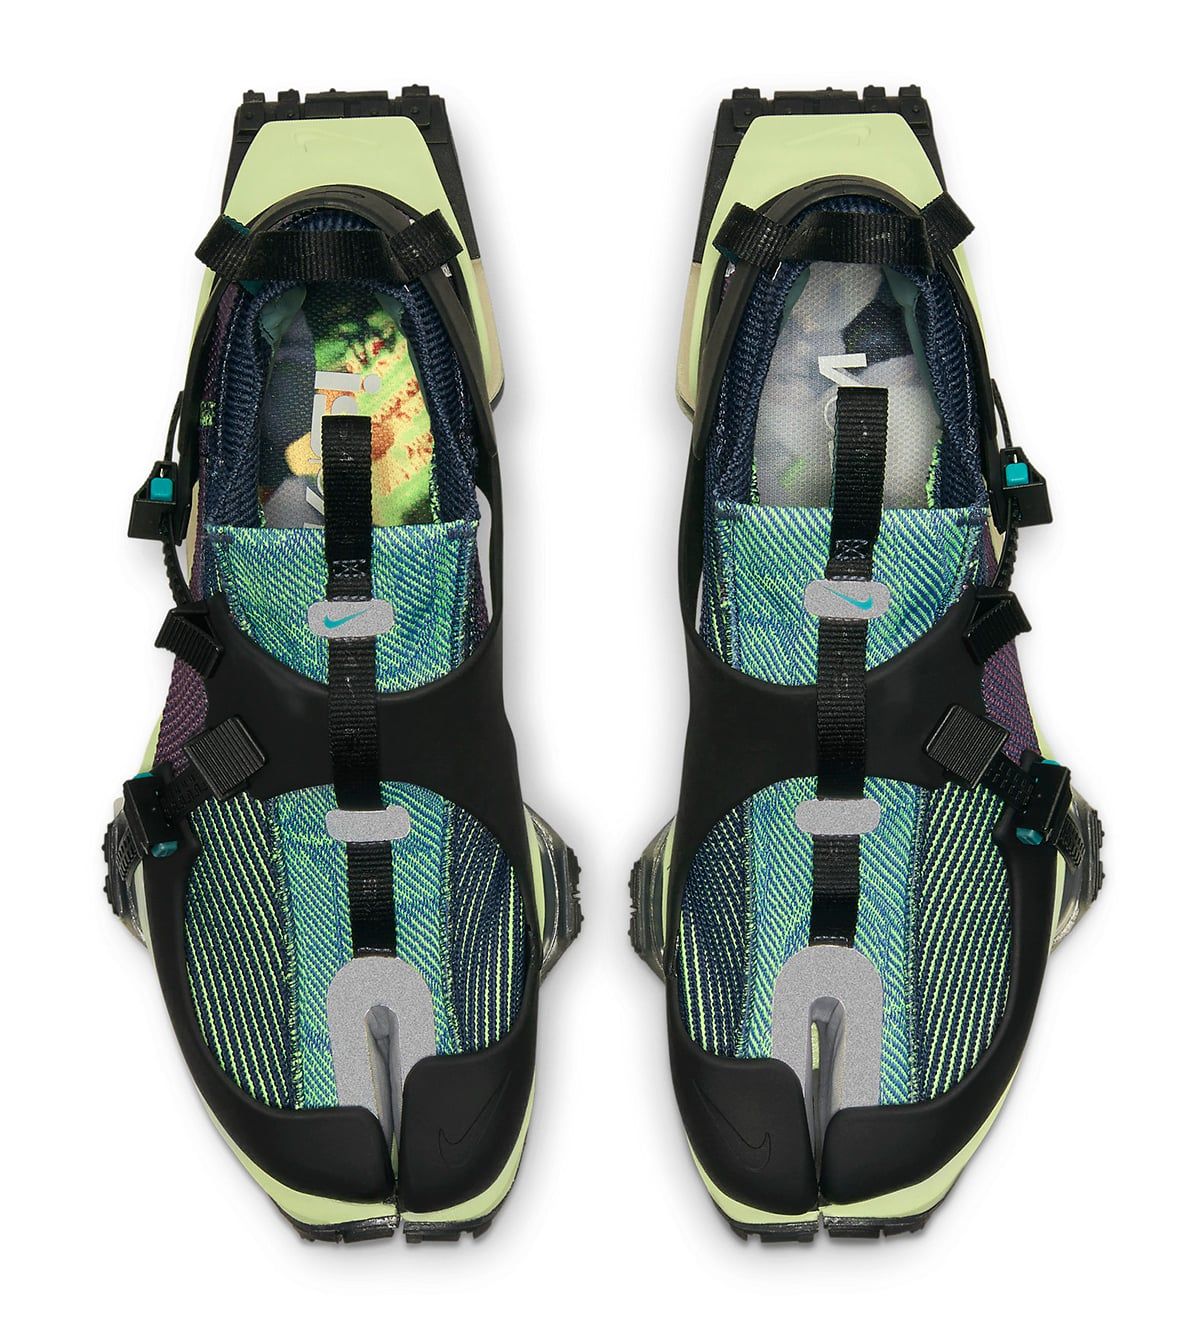 Nike ISPA Road Warrior “Clear Jade” Drops October 23rd | House of 